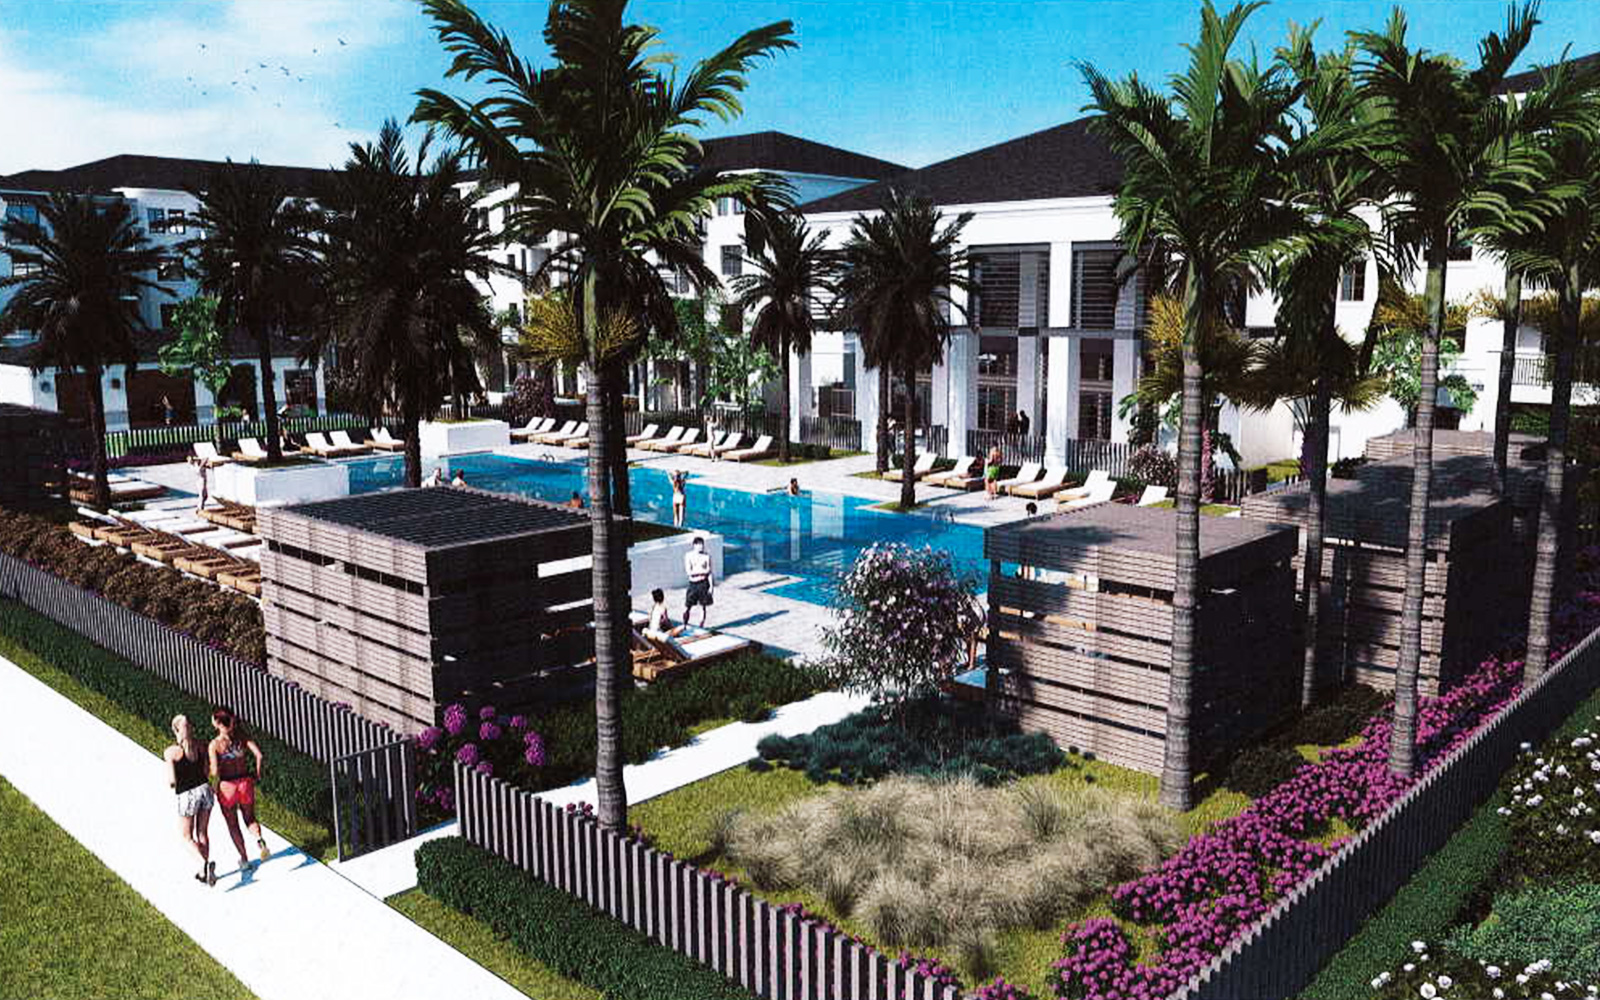 Morgan Group Plans 452-Unit Multifamily Project in Sunrise